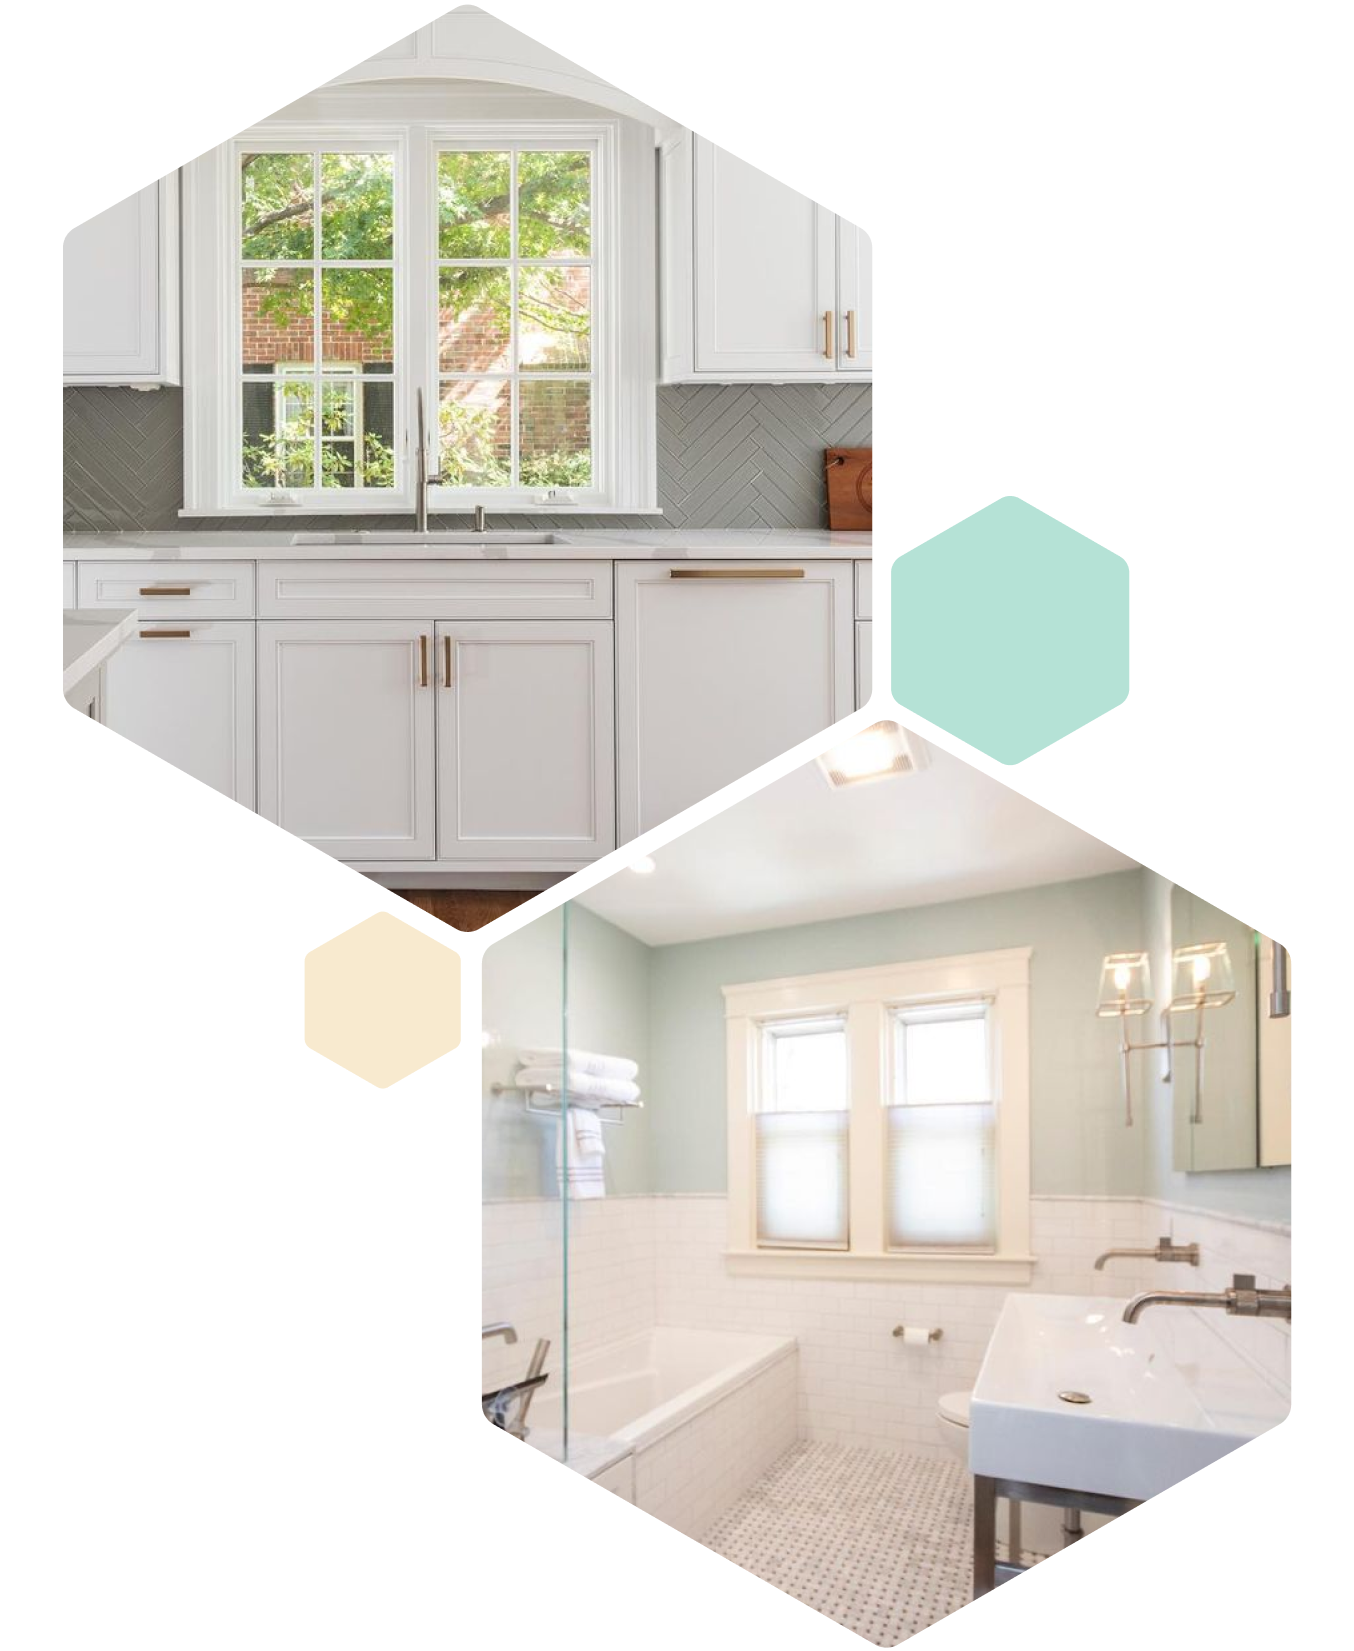 graphic hexagon shapes and images of a kitchen and bathroom